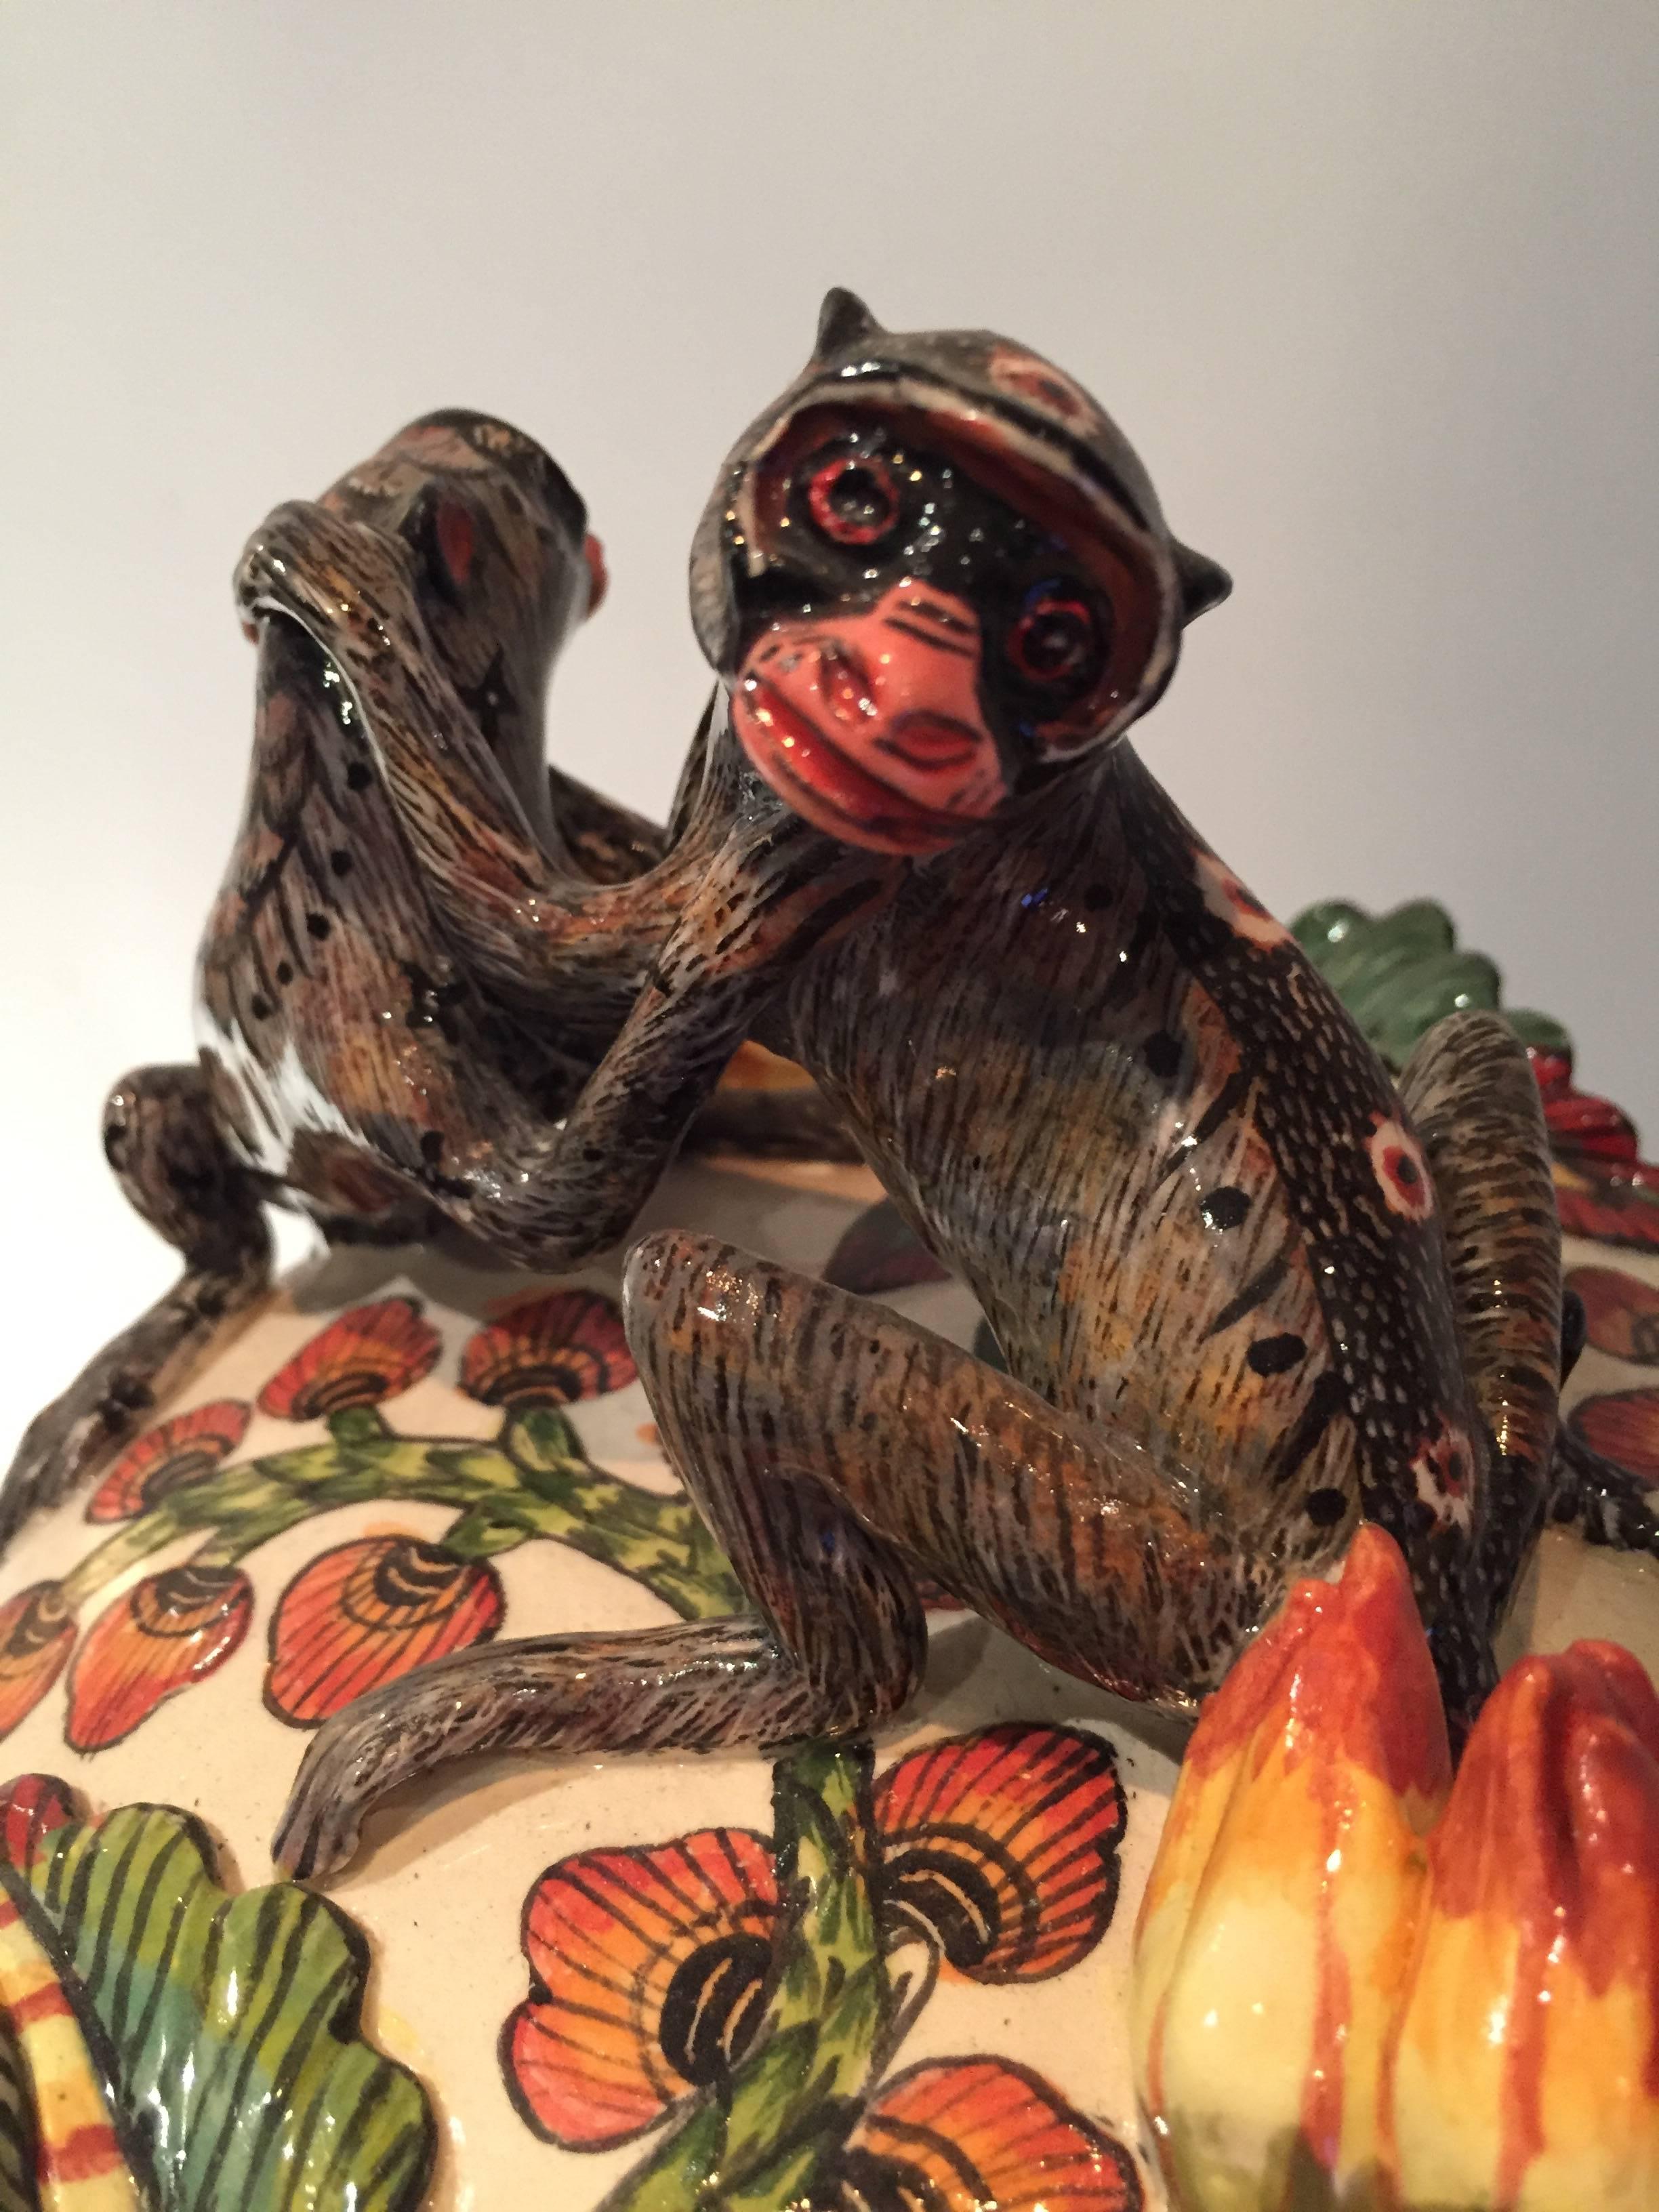 One of a kind monkey tureen, ceramic sculpture by Ardmore from South Africa. Sculpted by Qiniso Mungwe and George Manyathela, painted by Punch Shabalala. 

2016 is the year of the Monkey- 